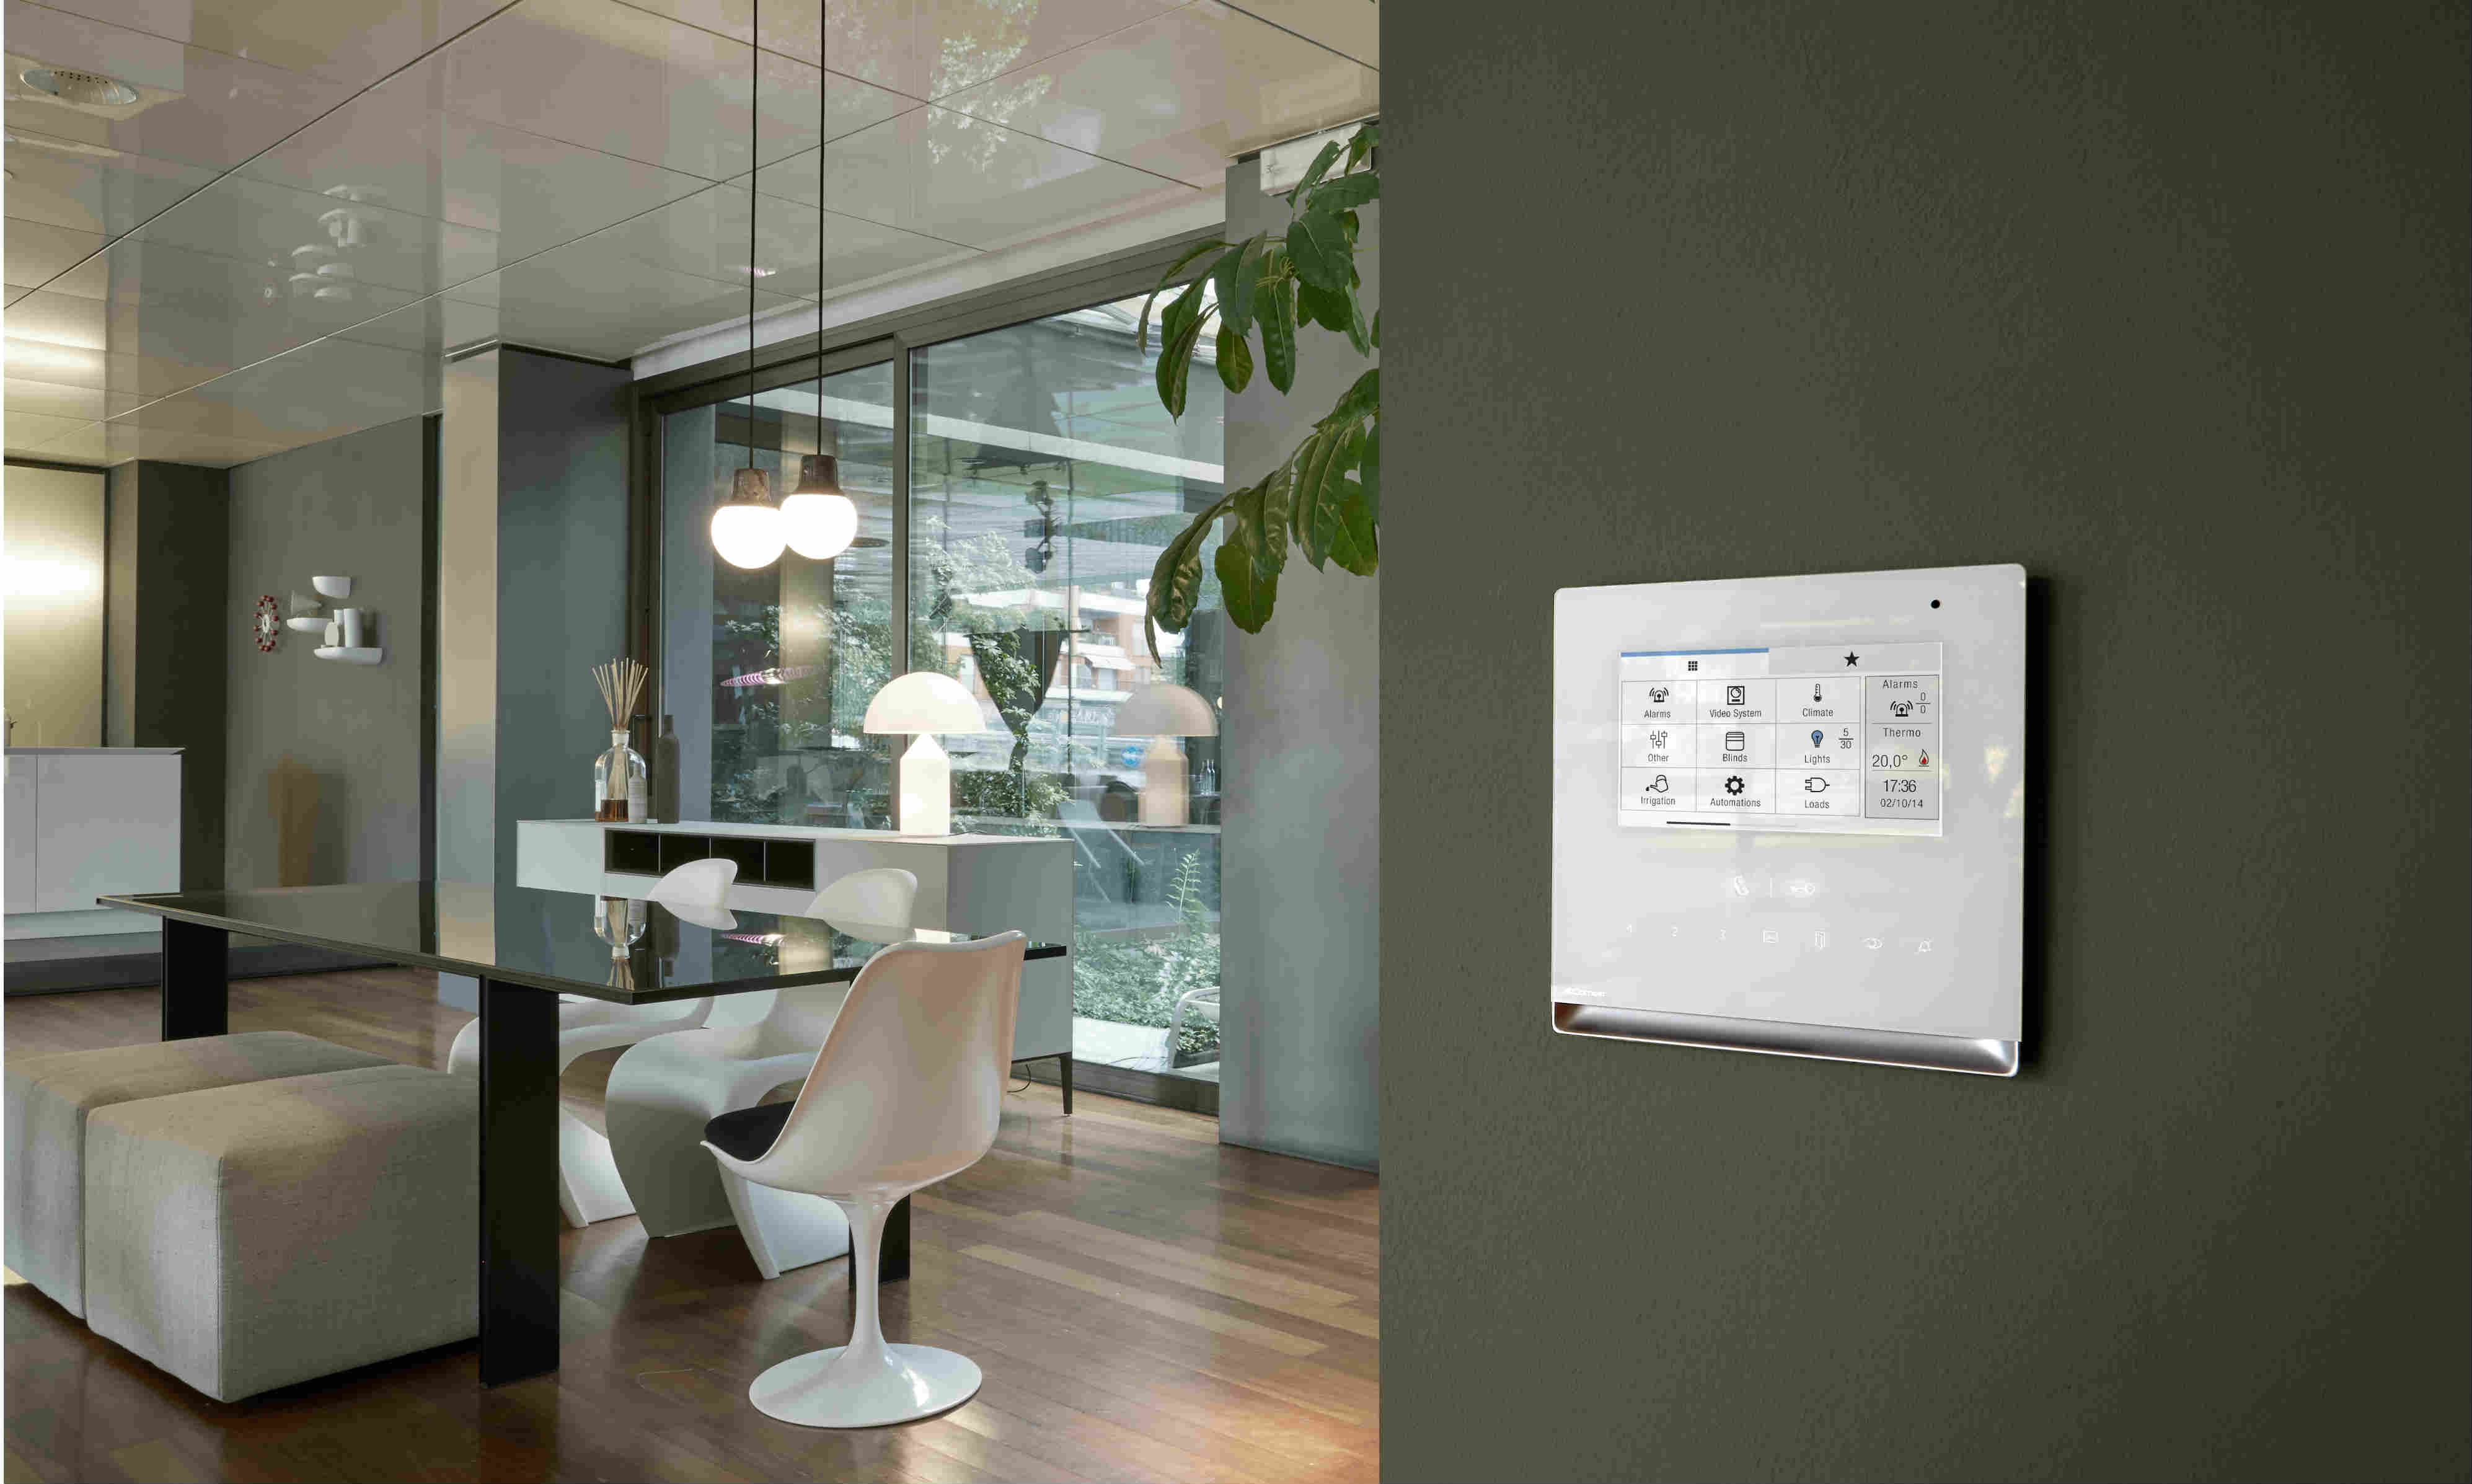 SimpleHome allows precise configuration to suit the individual lifestyles of each apartment owner, with programmable schedules of up to seven days.